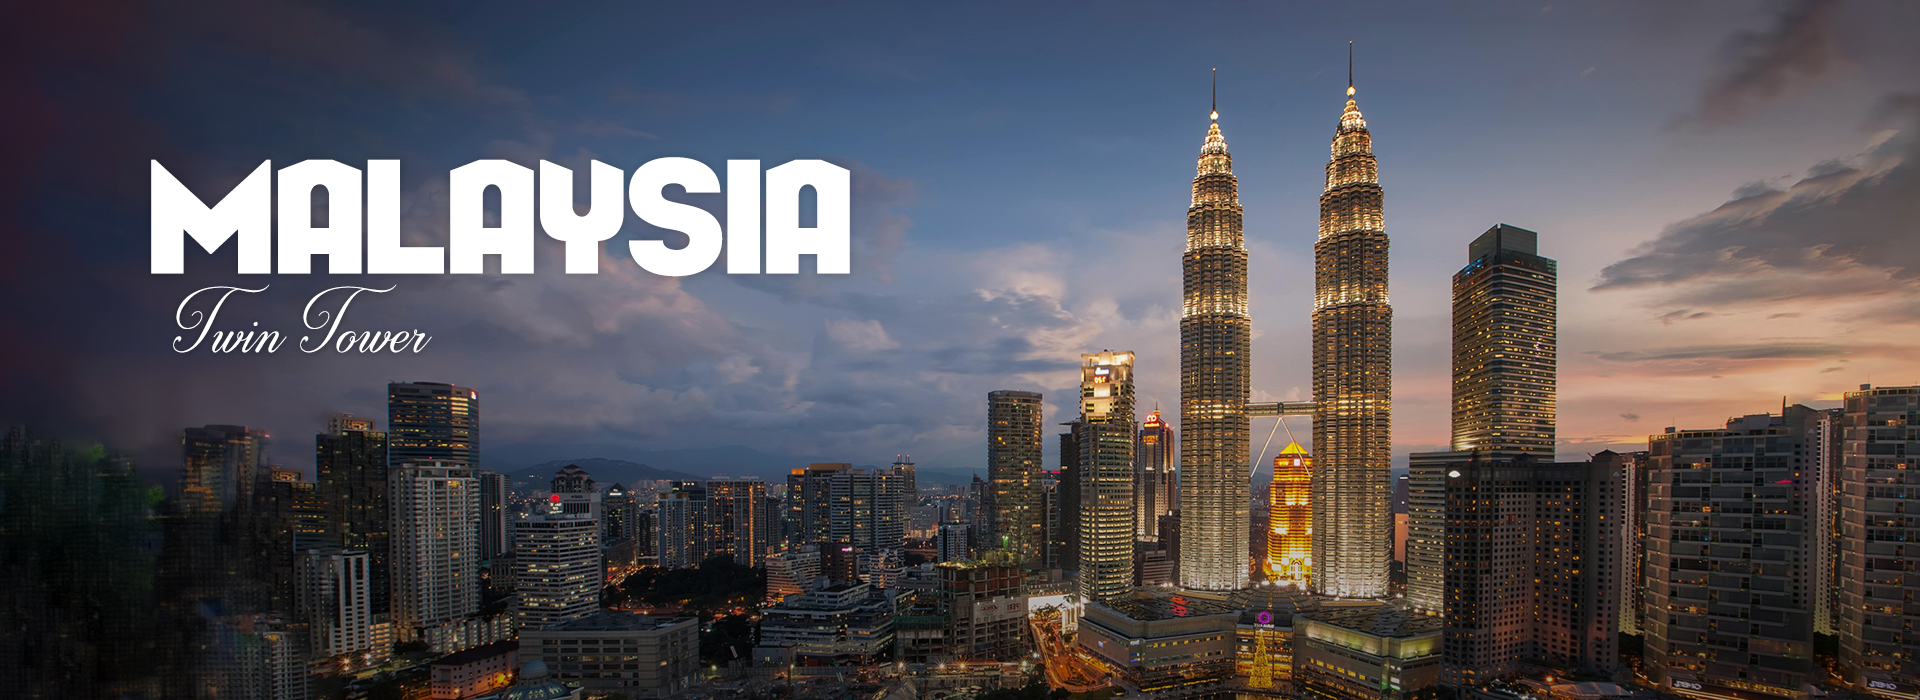 Malaysia Package Tour